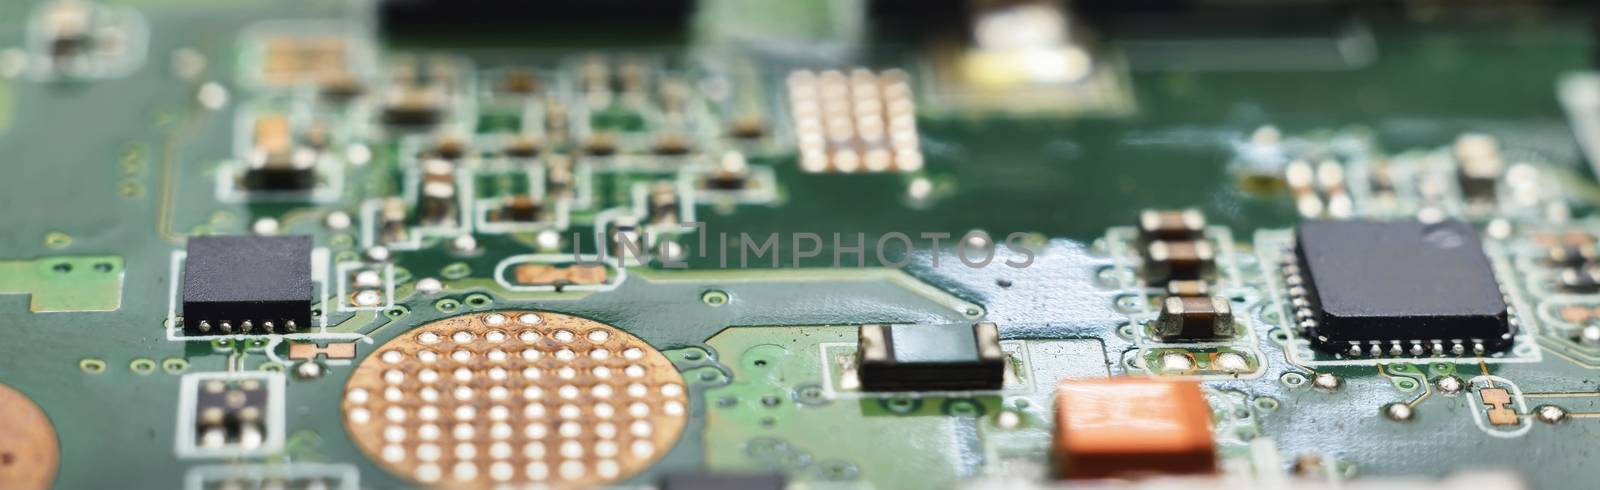 micro electronics develop and manufacturing background (hardware)